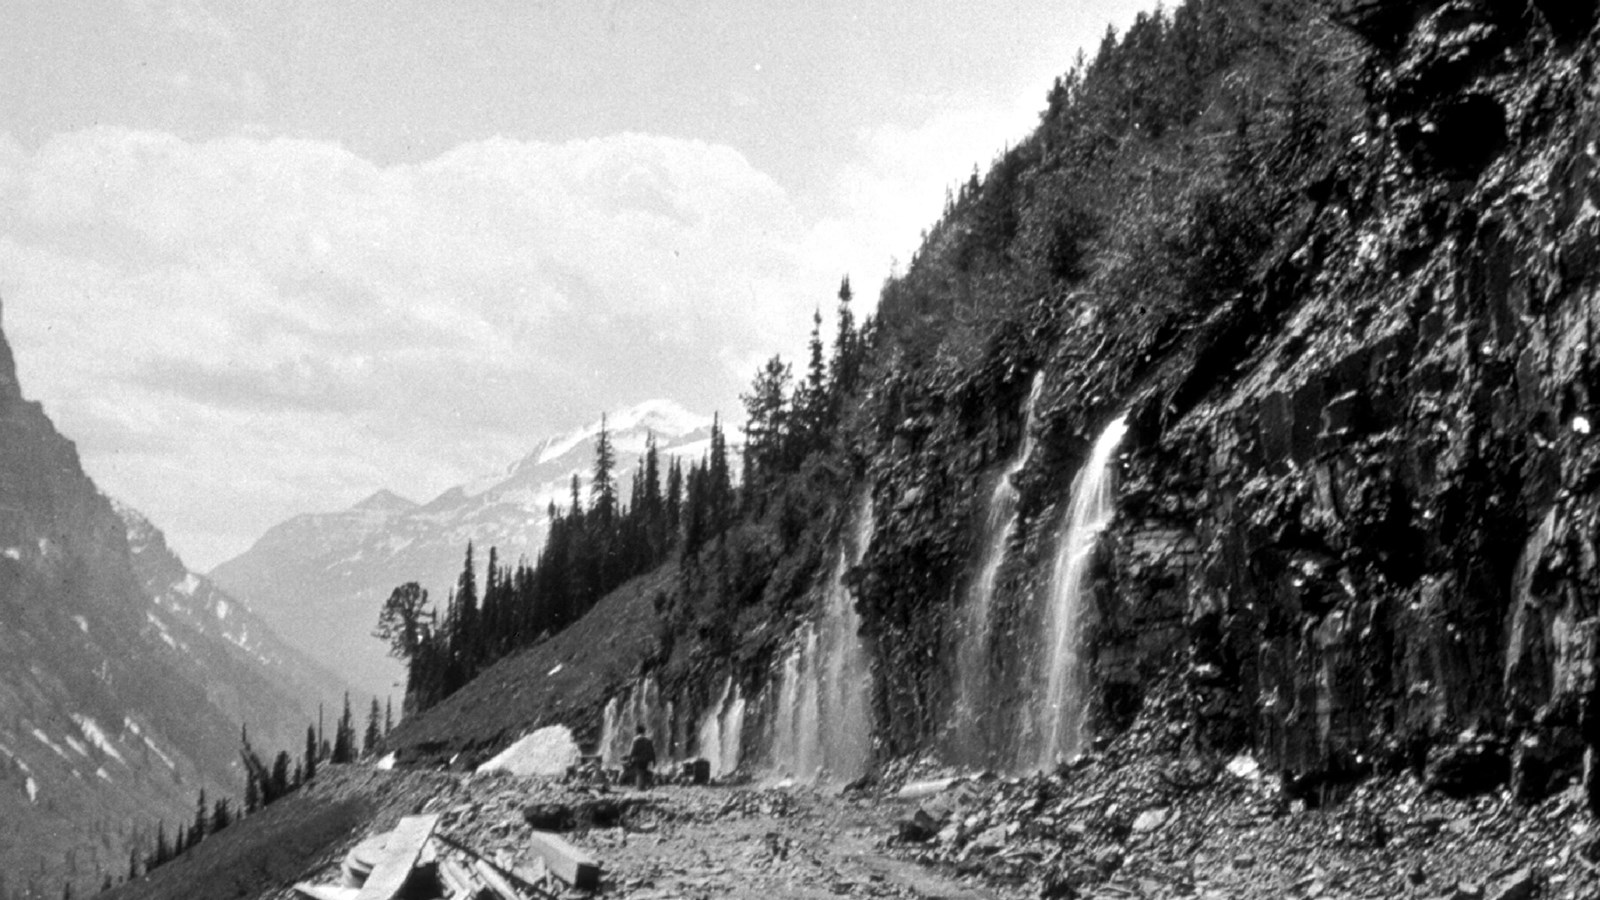 A black and white picture of the weeping wall along Going-to-the-Sun Road